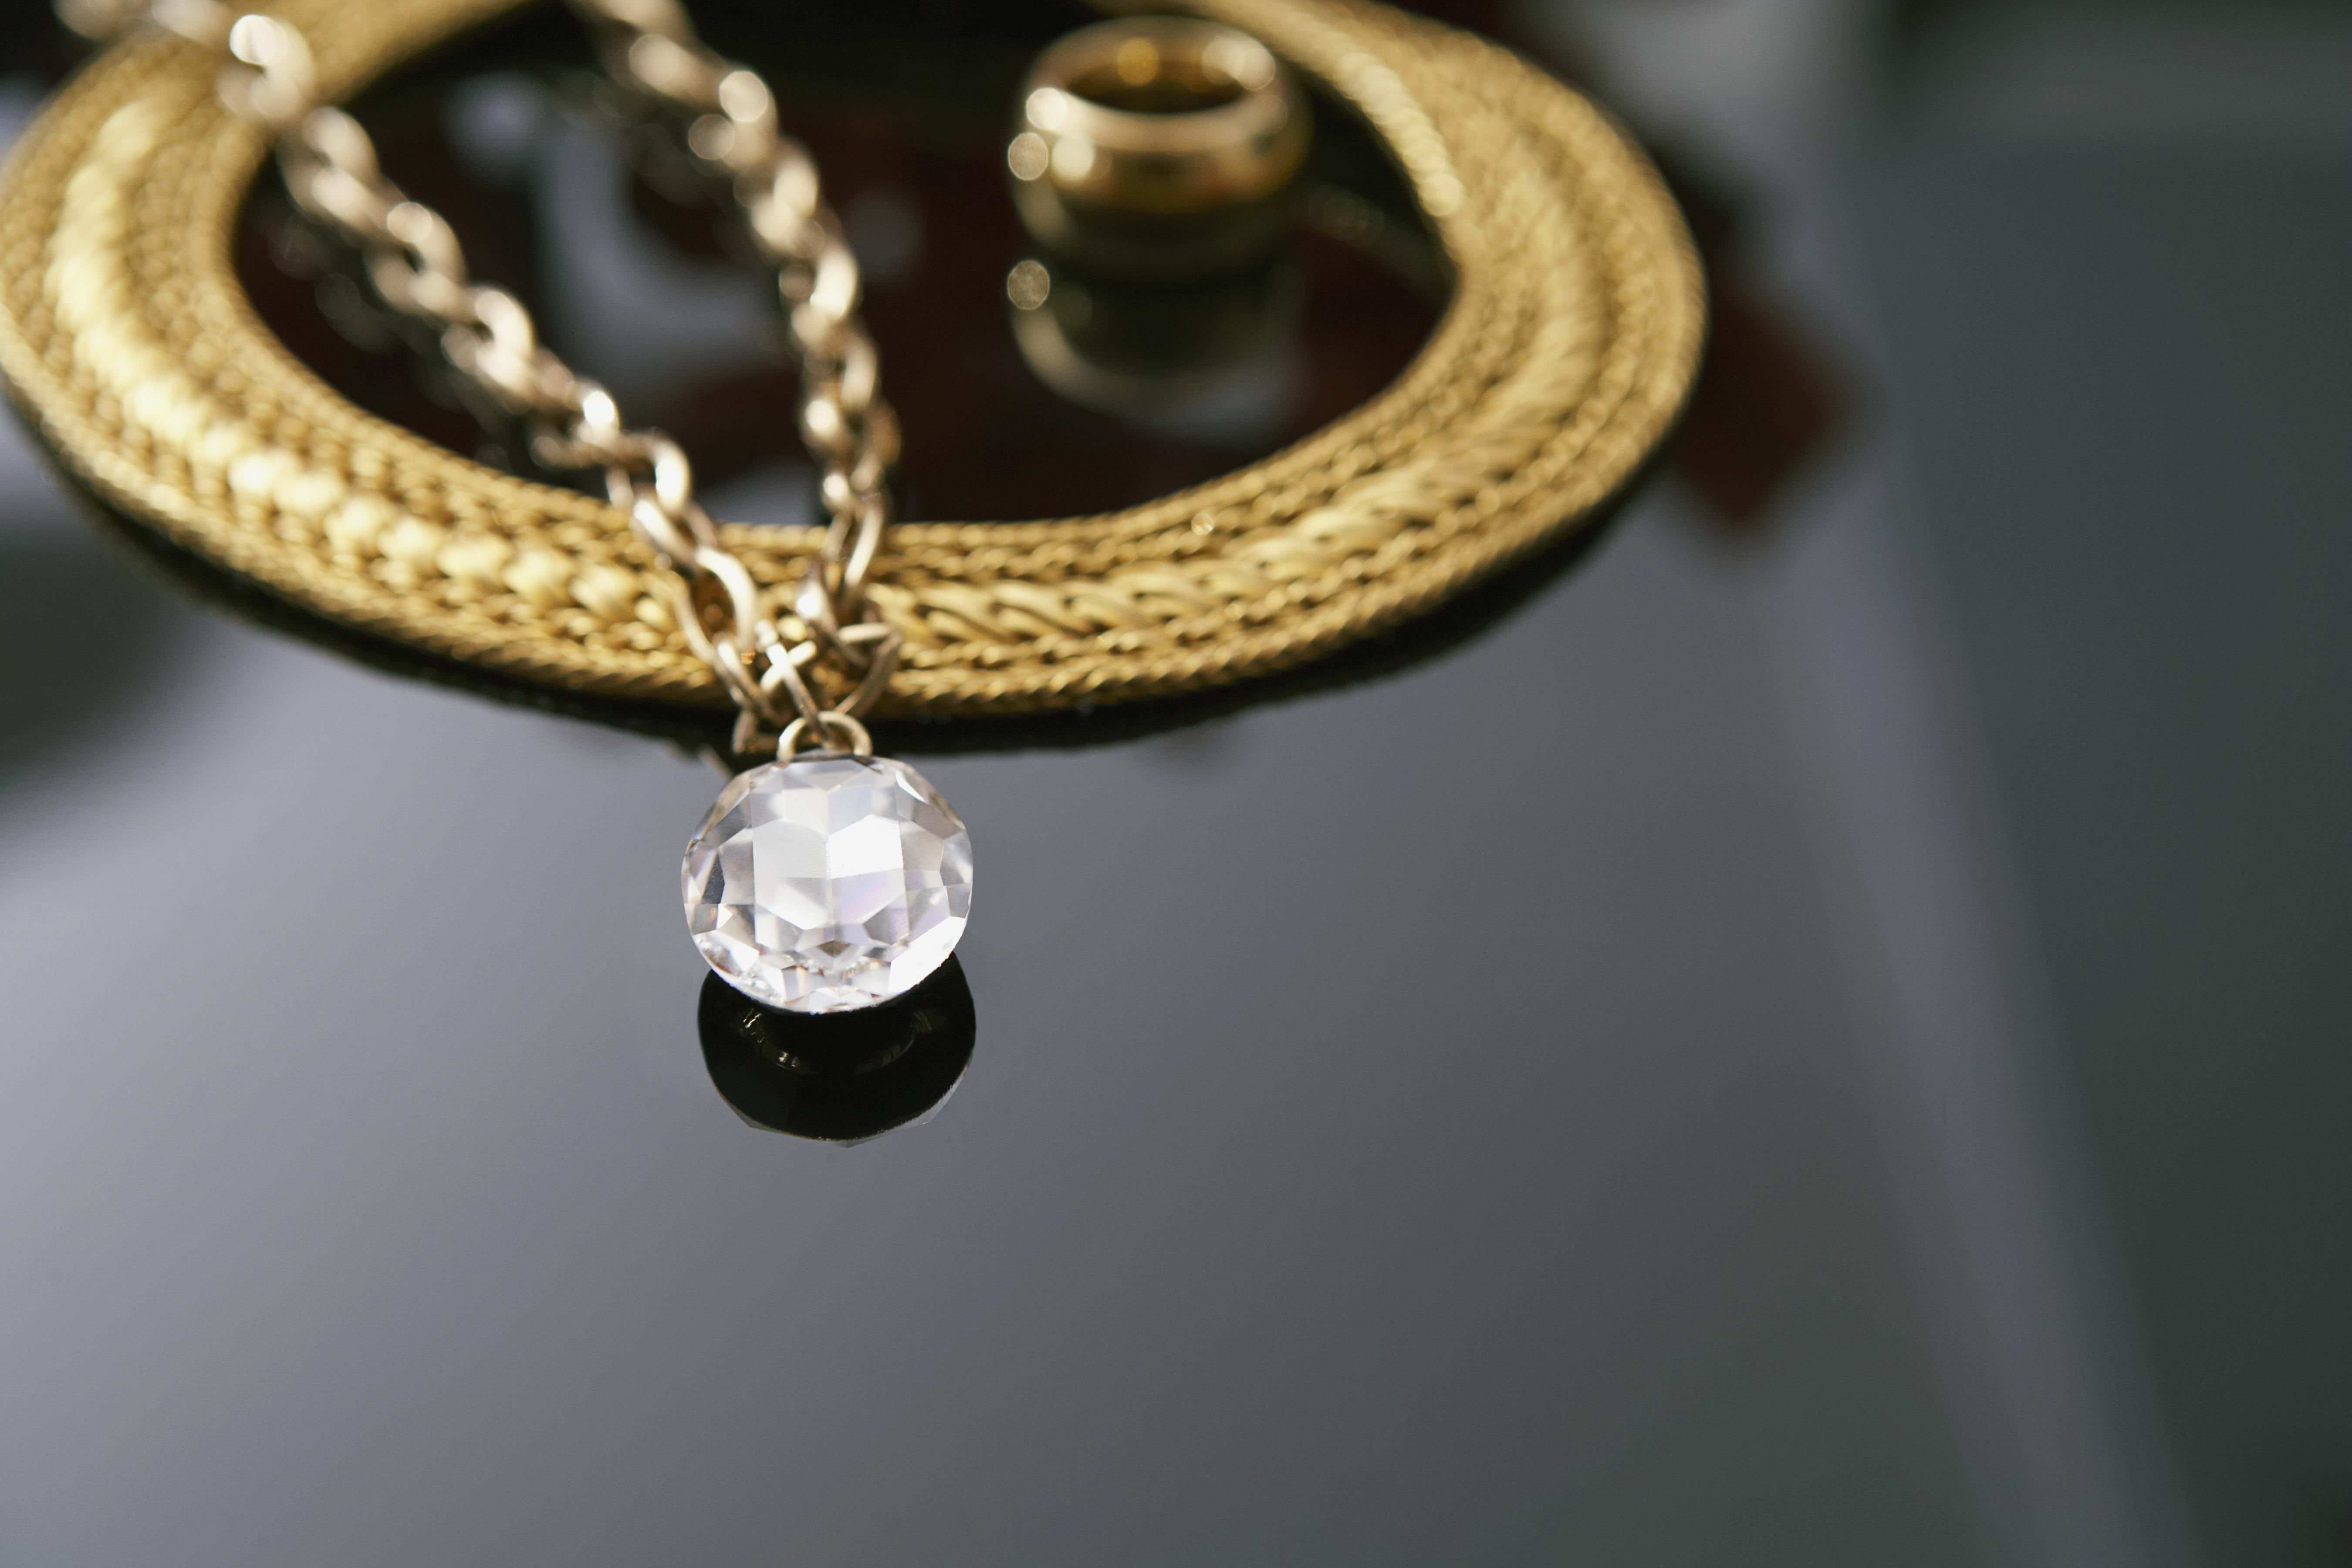 A gold necklace with a large diamond. - Diamond